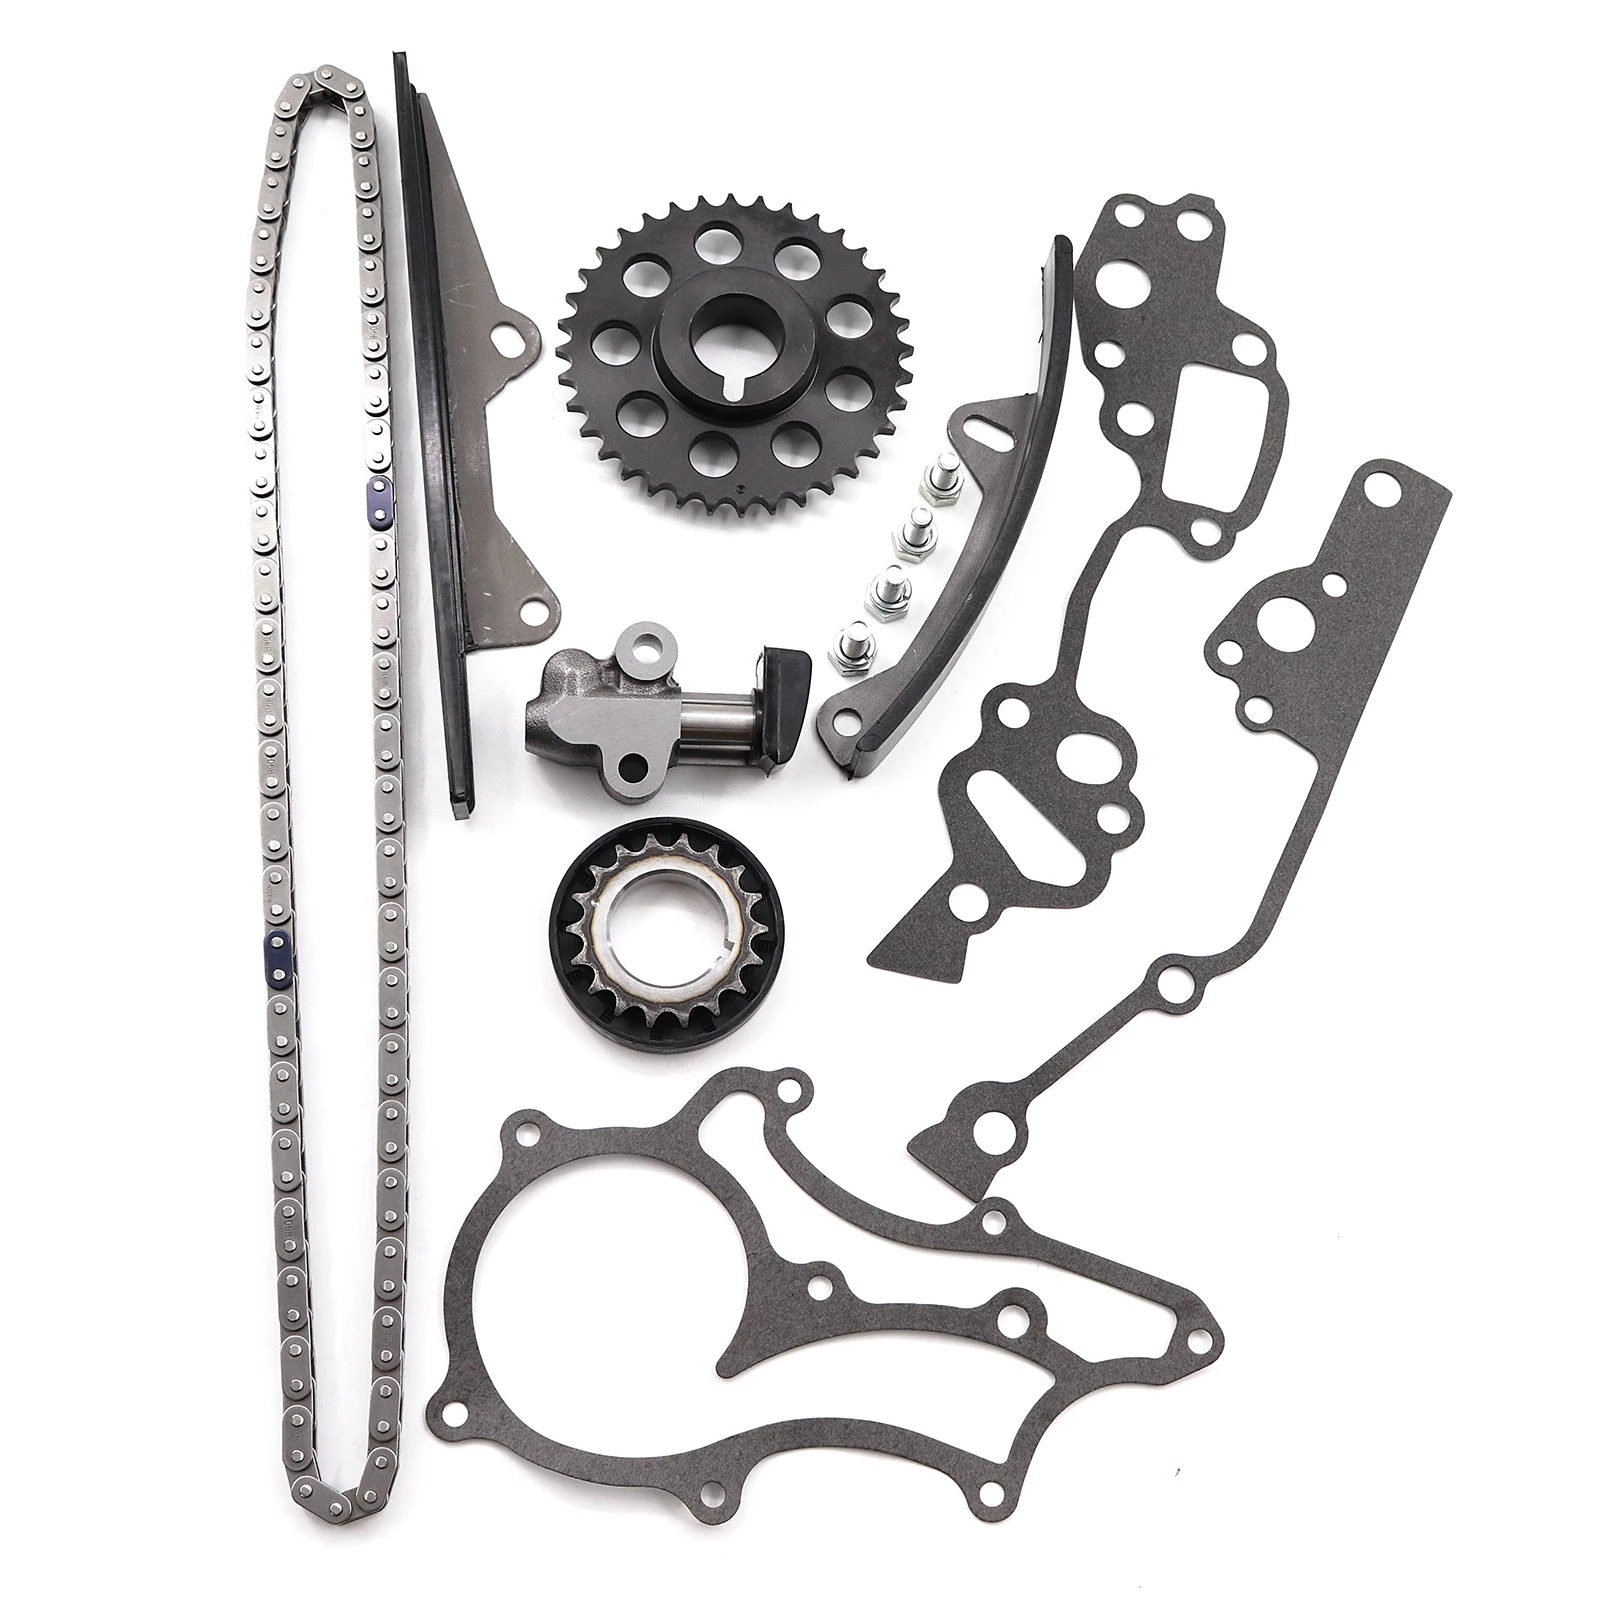 Timing Chain Kit Fit 85-95 2.4 Toyota 22R 22RE